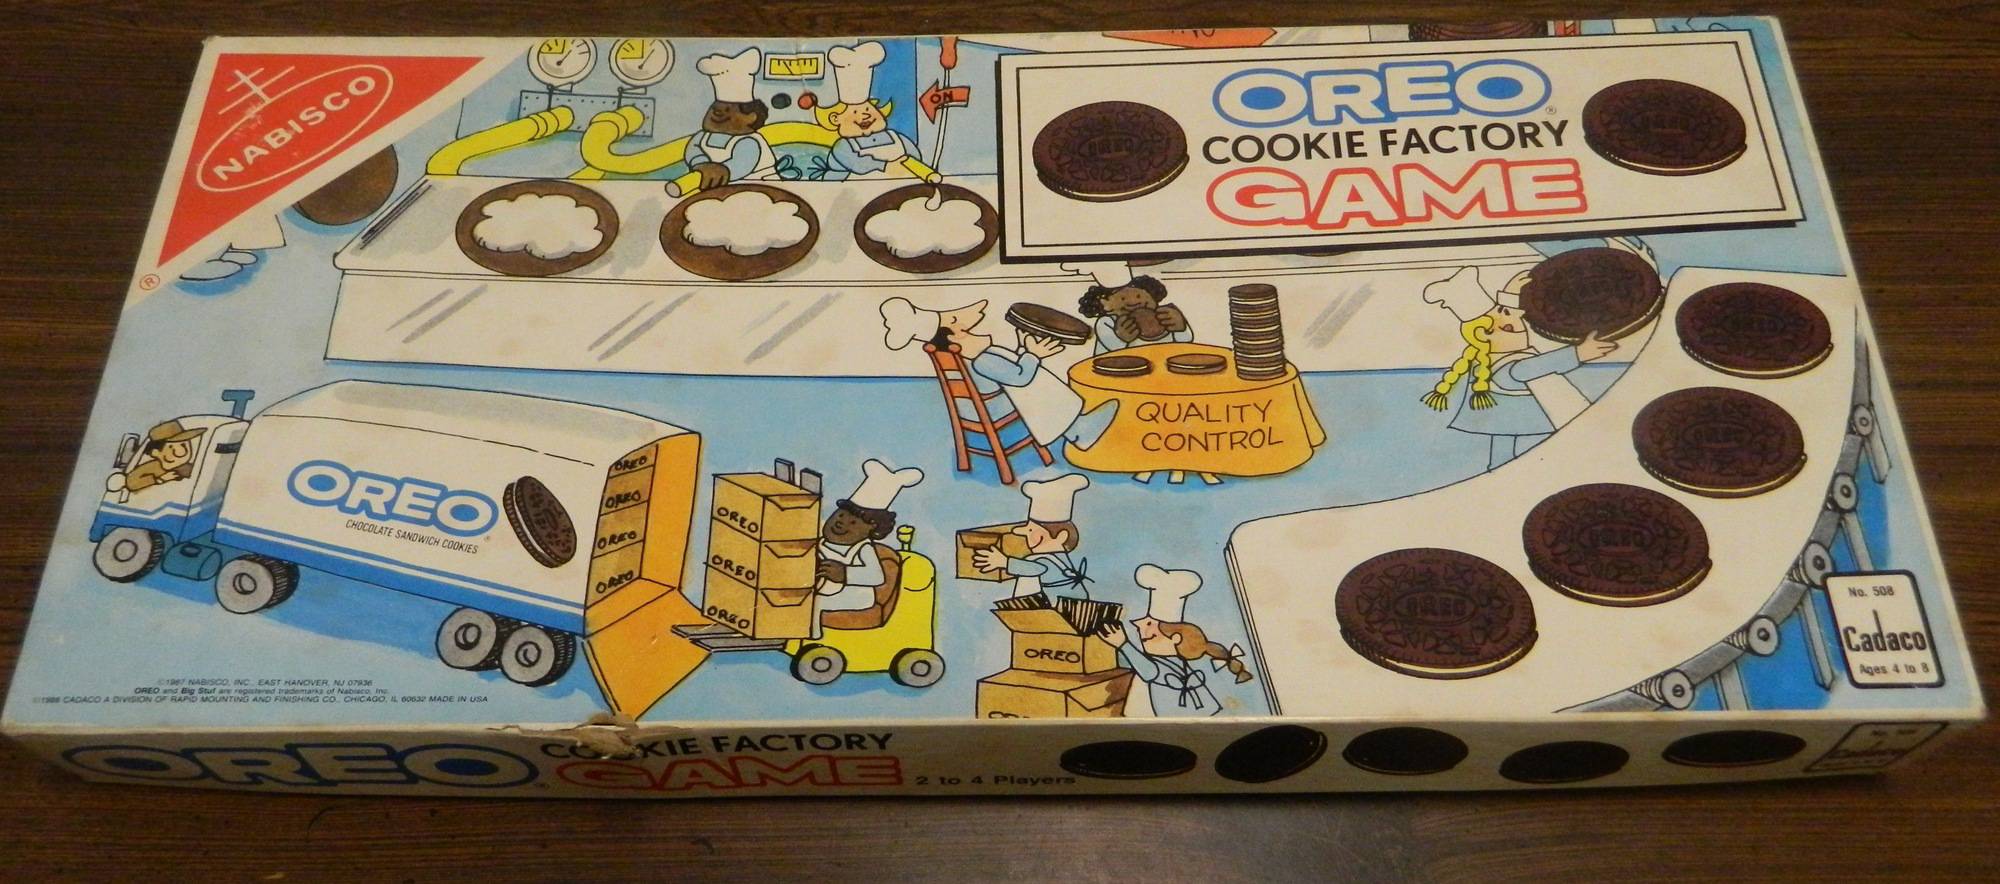 Oreo Cookie Factory Game Board Game Review and Rules